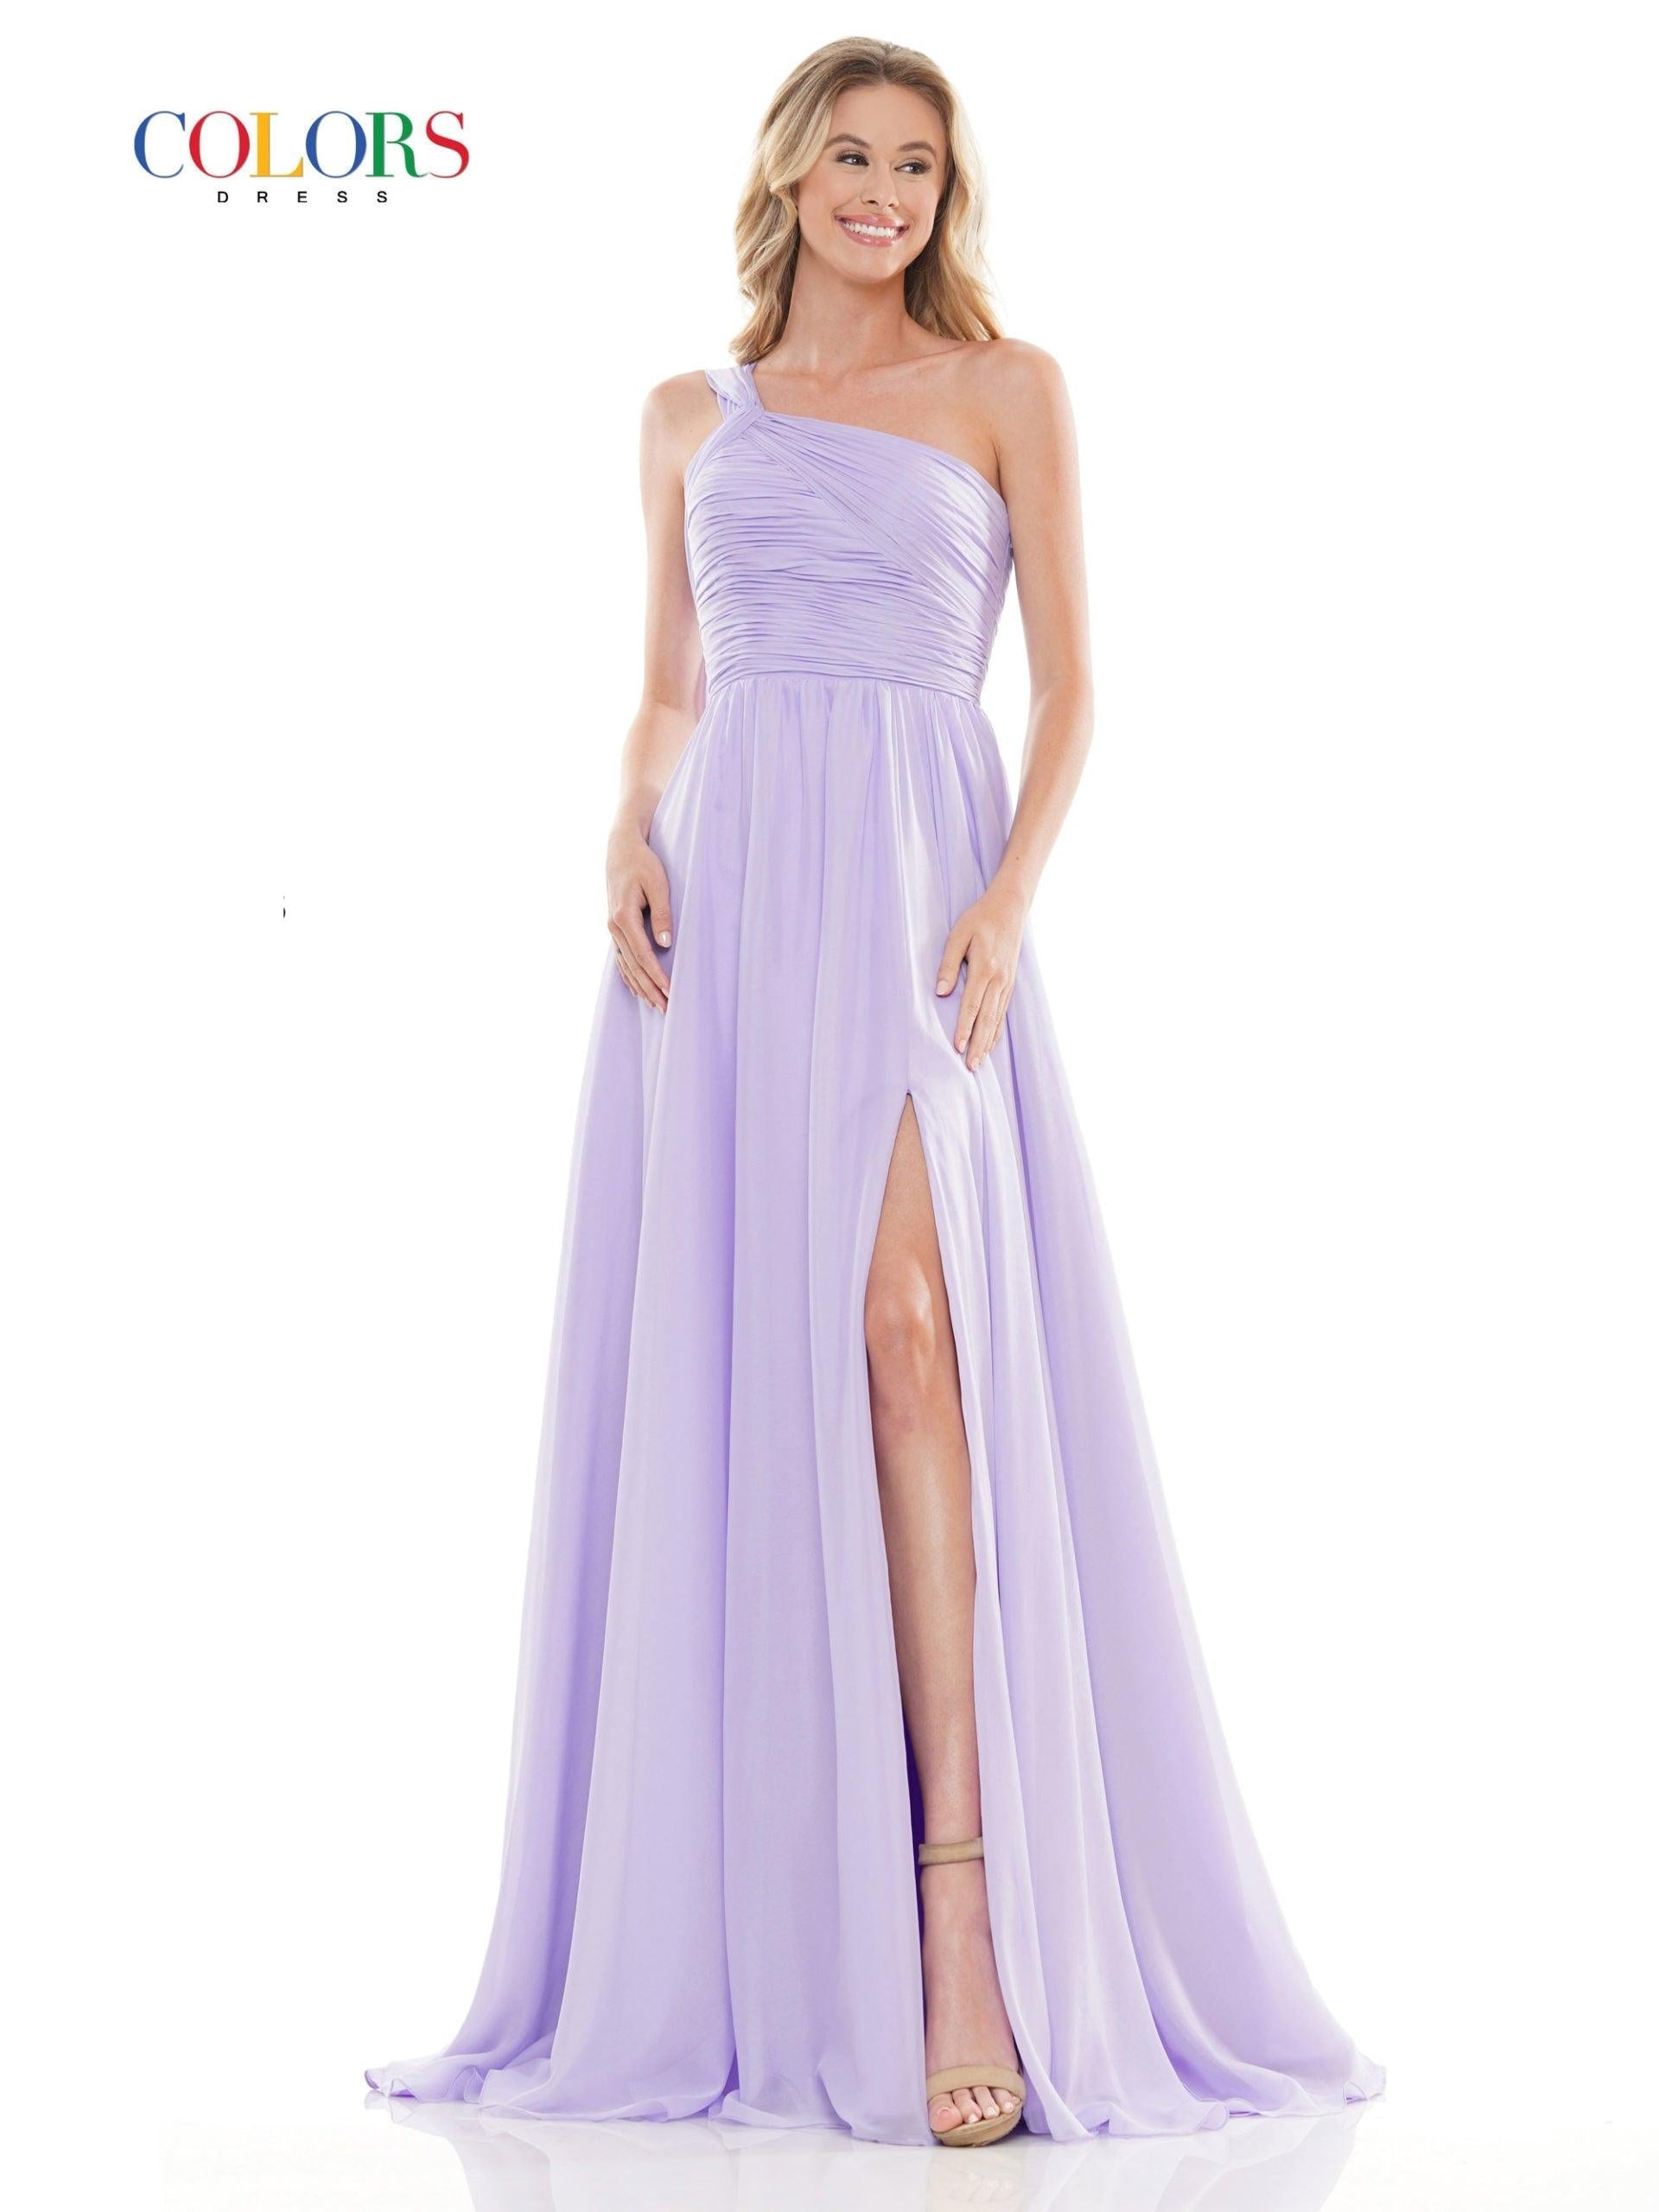 Colors Long One Shoulder Prom Chiffon Dress 2714 - The Dress Outlet